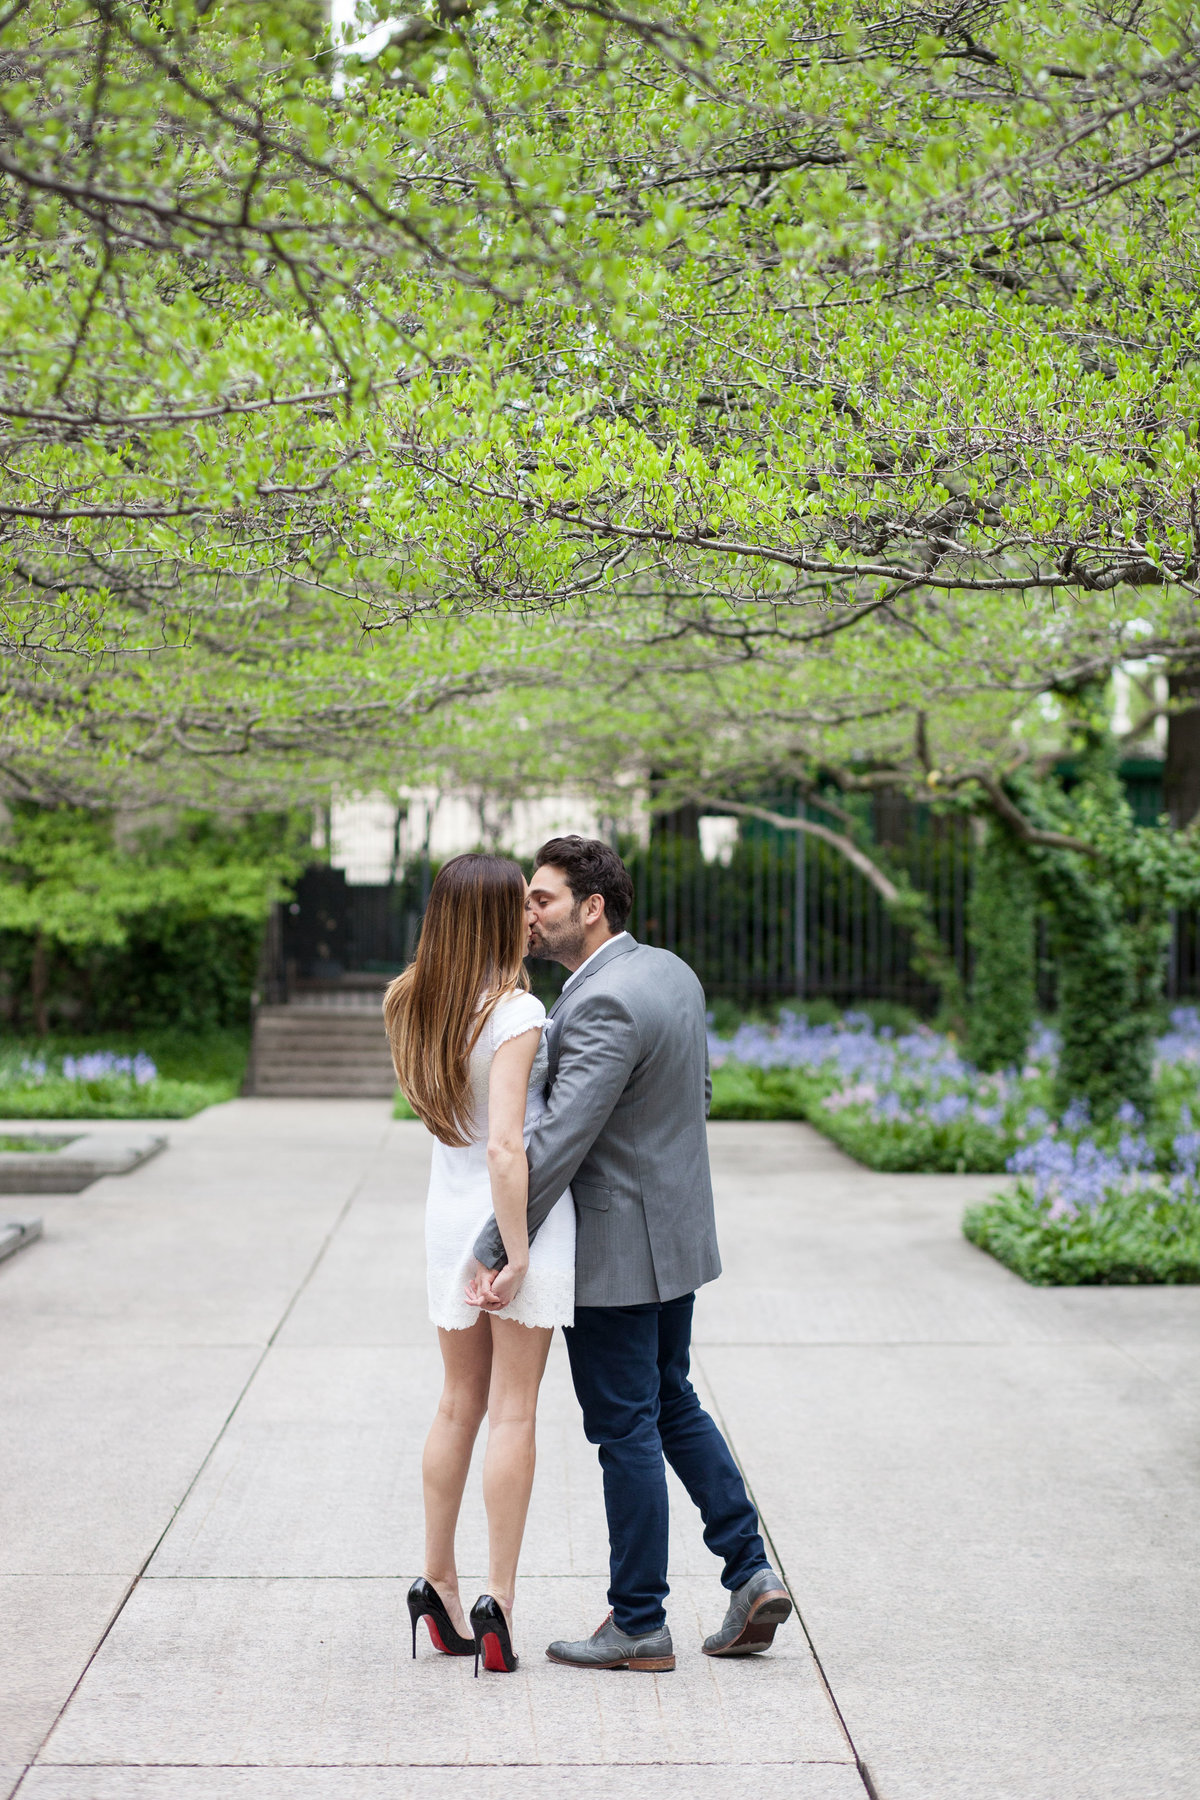 Shaina and Ferhat - Natalie Probst Photography026